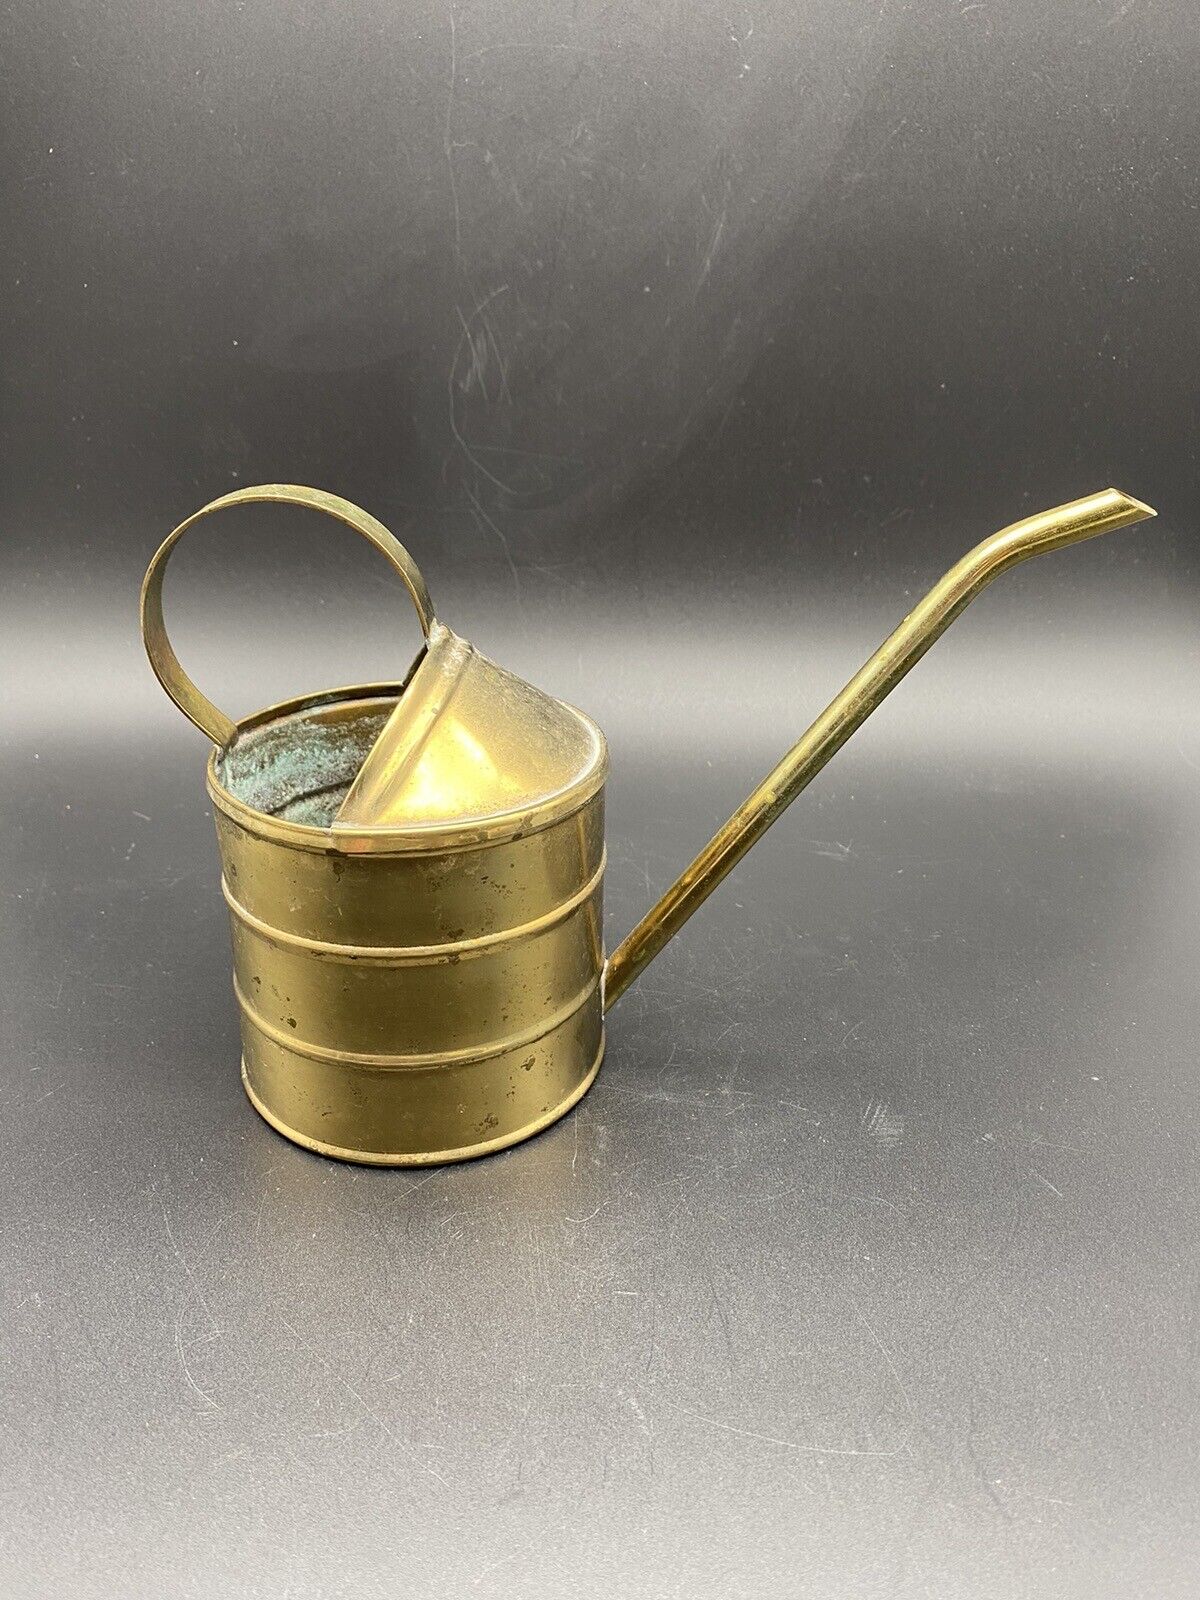 Vintage Brass Watering Can